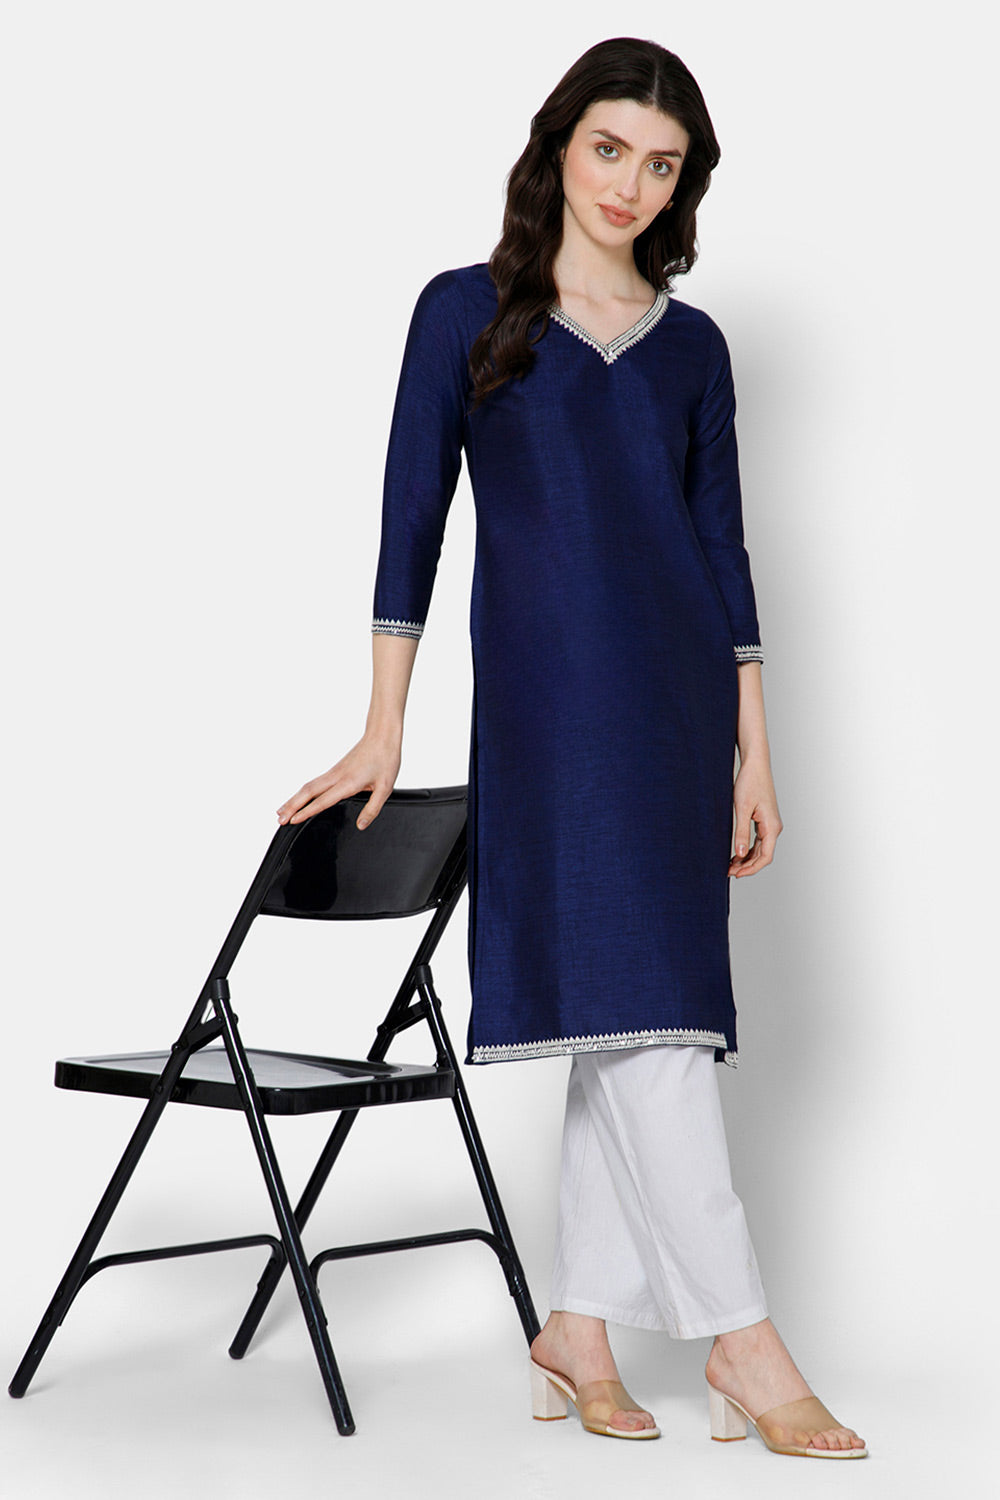 Mythri Women's Casual Kurthi with Minimalistic Embroidery At The Neckline - Blue - E075